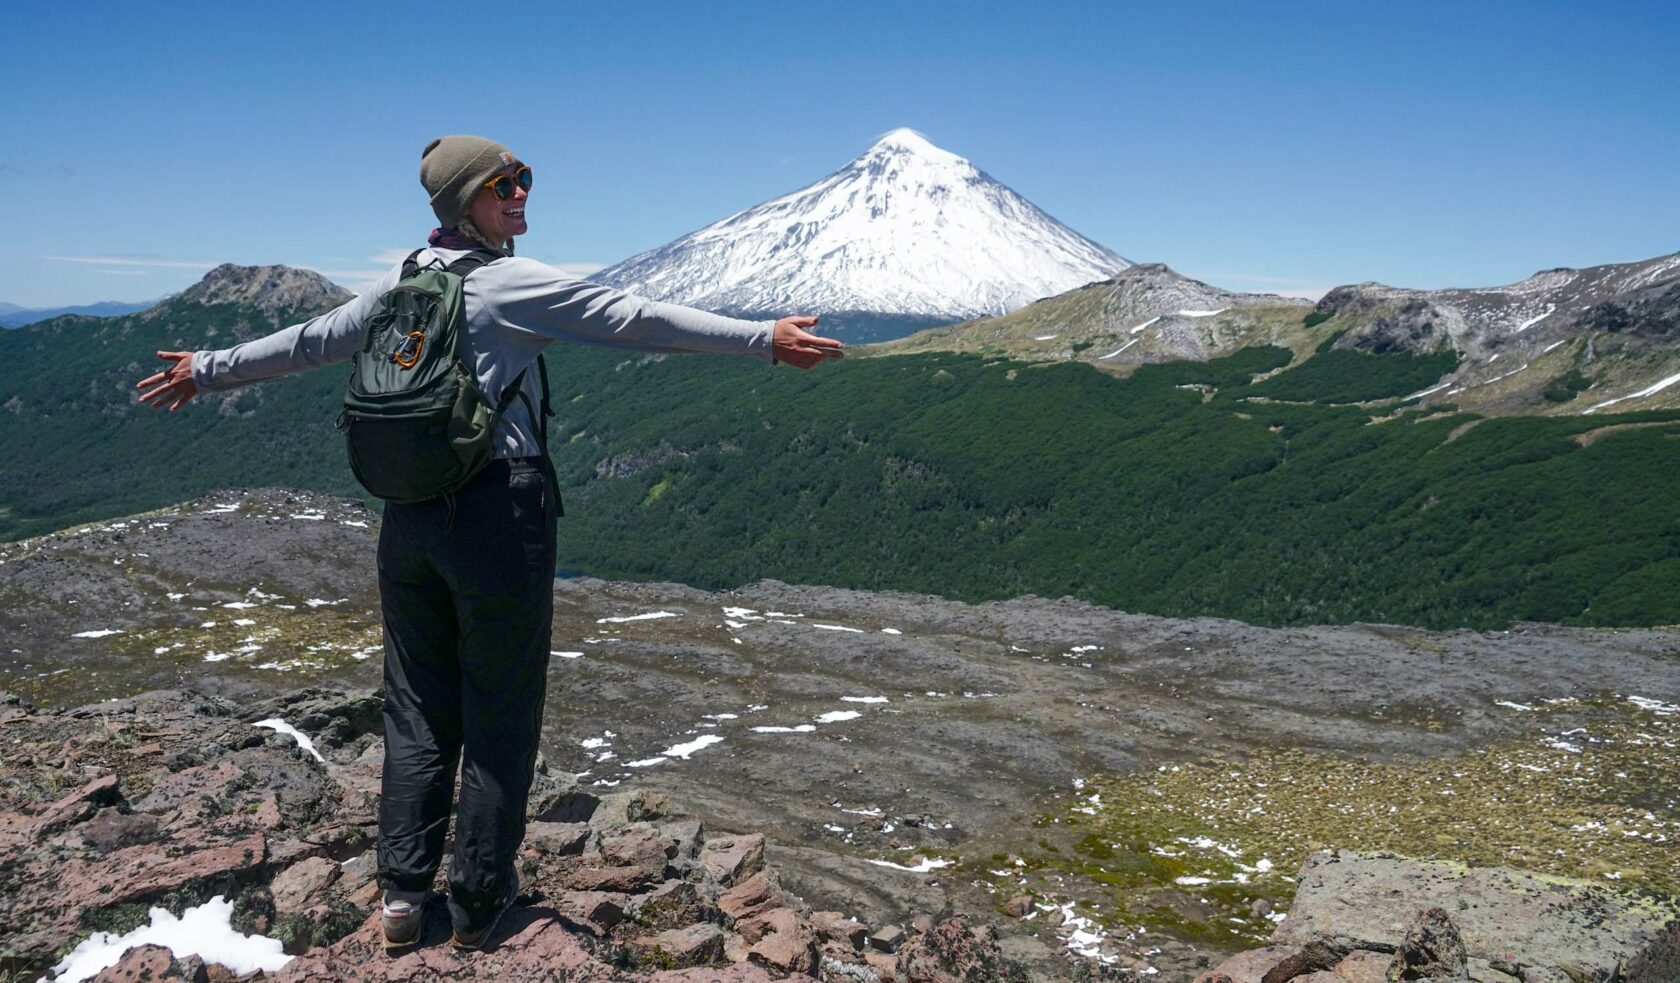 A woman with her arms outstretched, taking in a view of a snowcapped mountain.